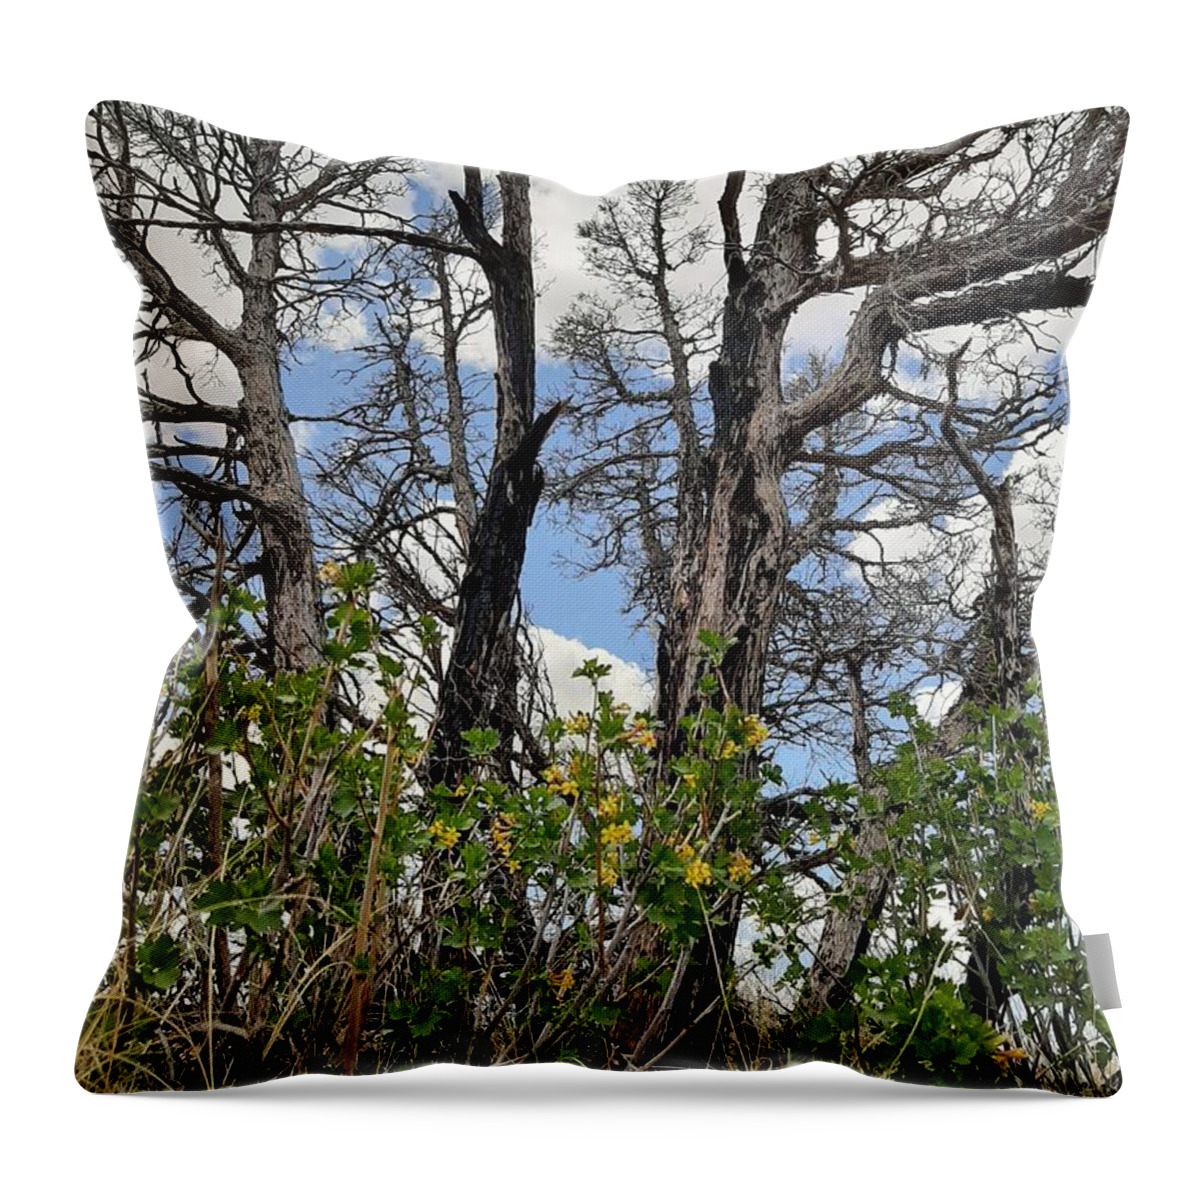 Burn Throw Pillow featuring the photograph New Growth by Burned Juniper by Amanda R Wright